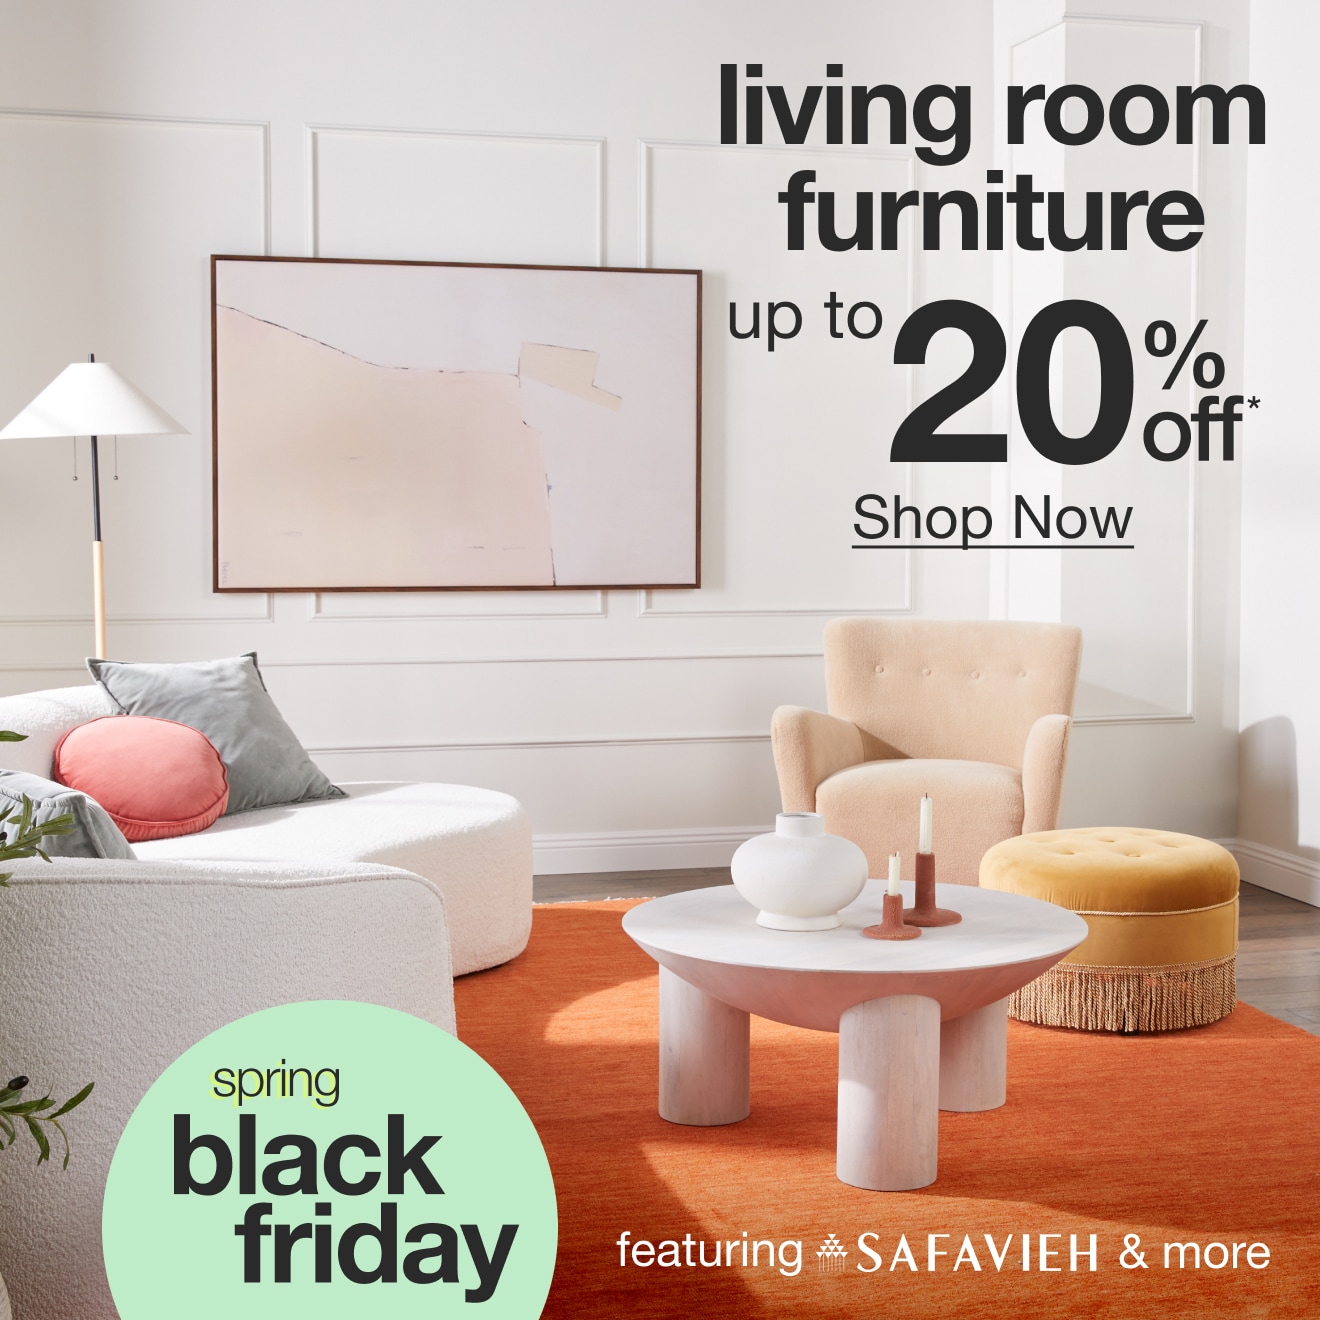 Living Room Furniture Up to 20% Off — Shop Now!